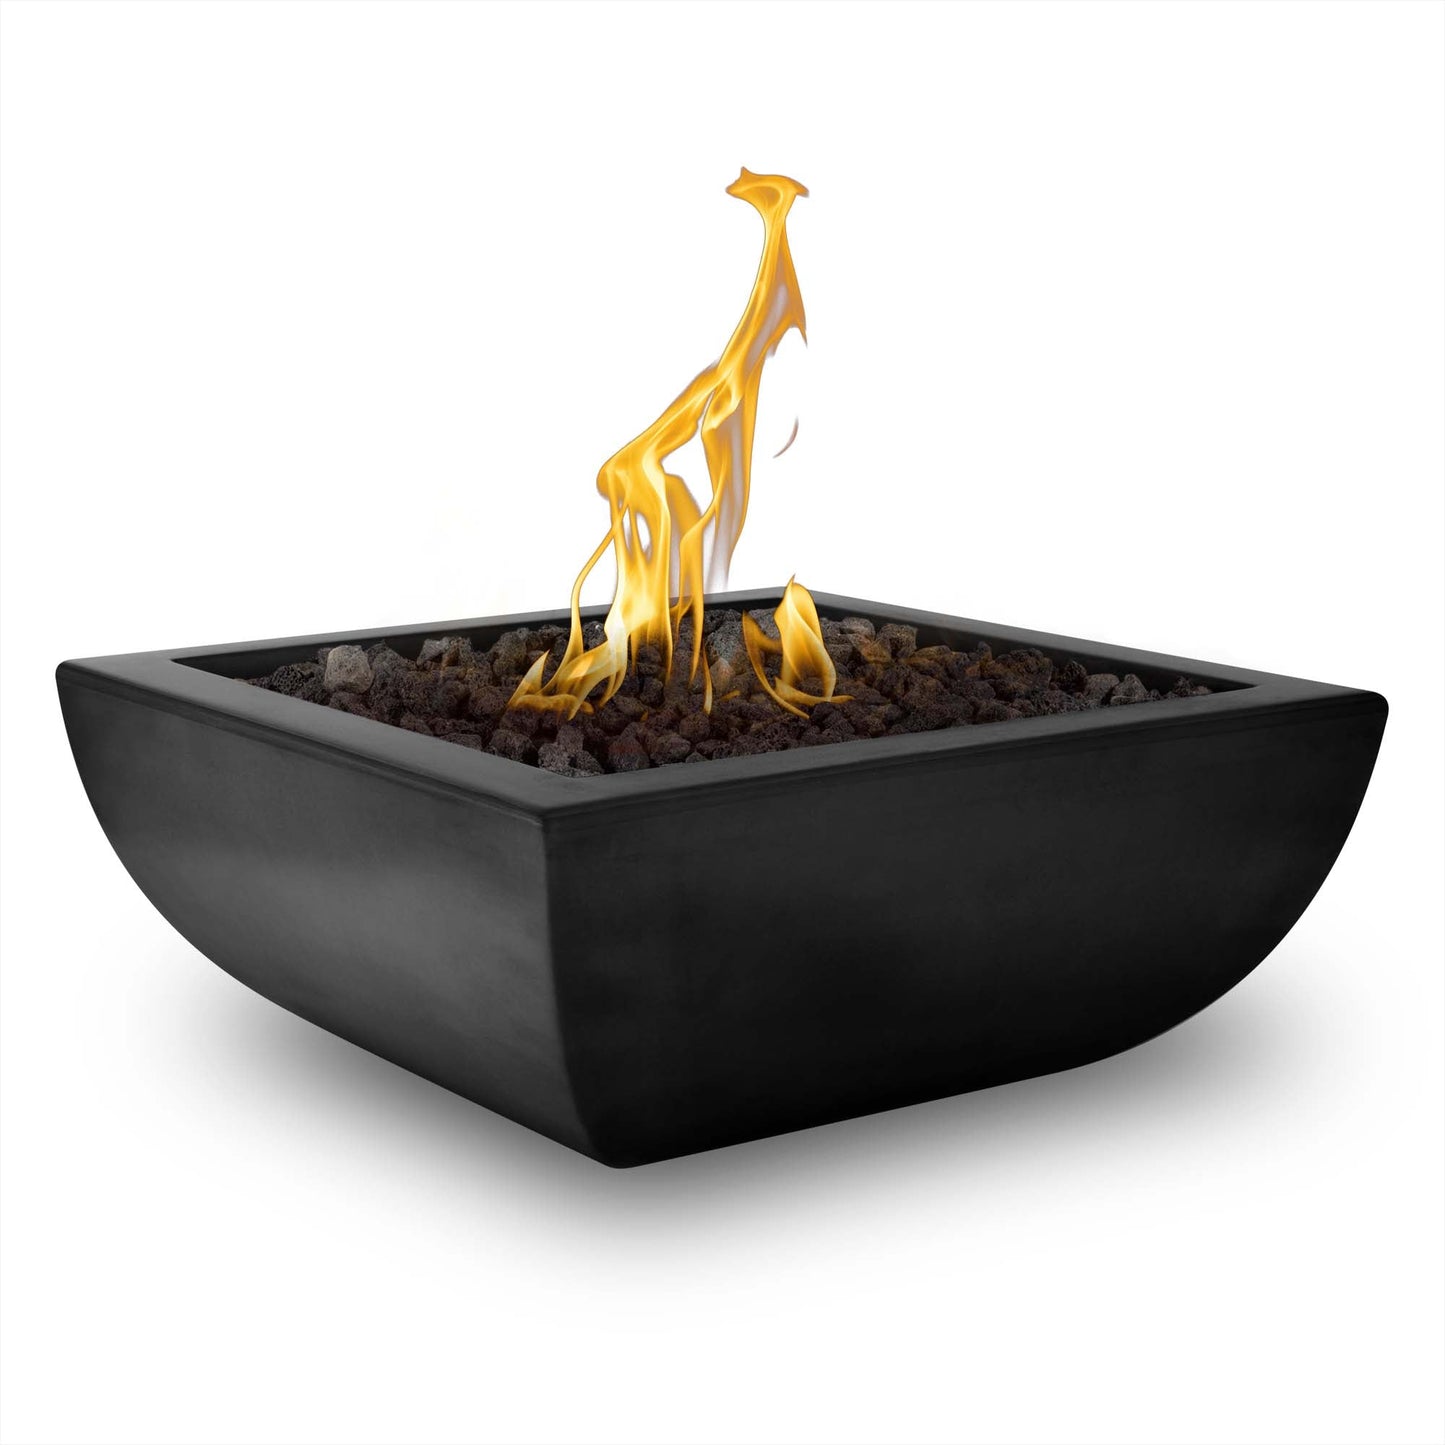 The Outdoor Plus Square Avalon 24" Chocolate GFRC Concrete Natural Gas Fire Bowl with Match Lit with Flame Sense Ignition